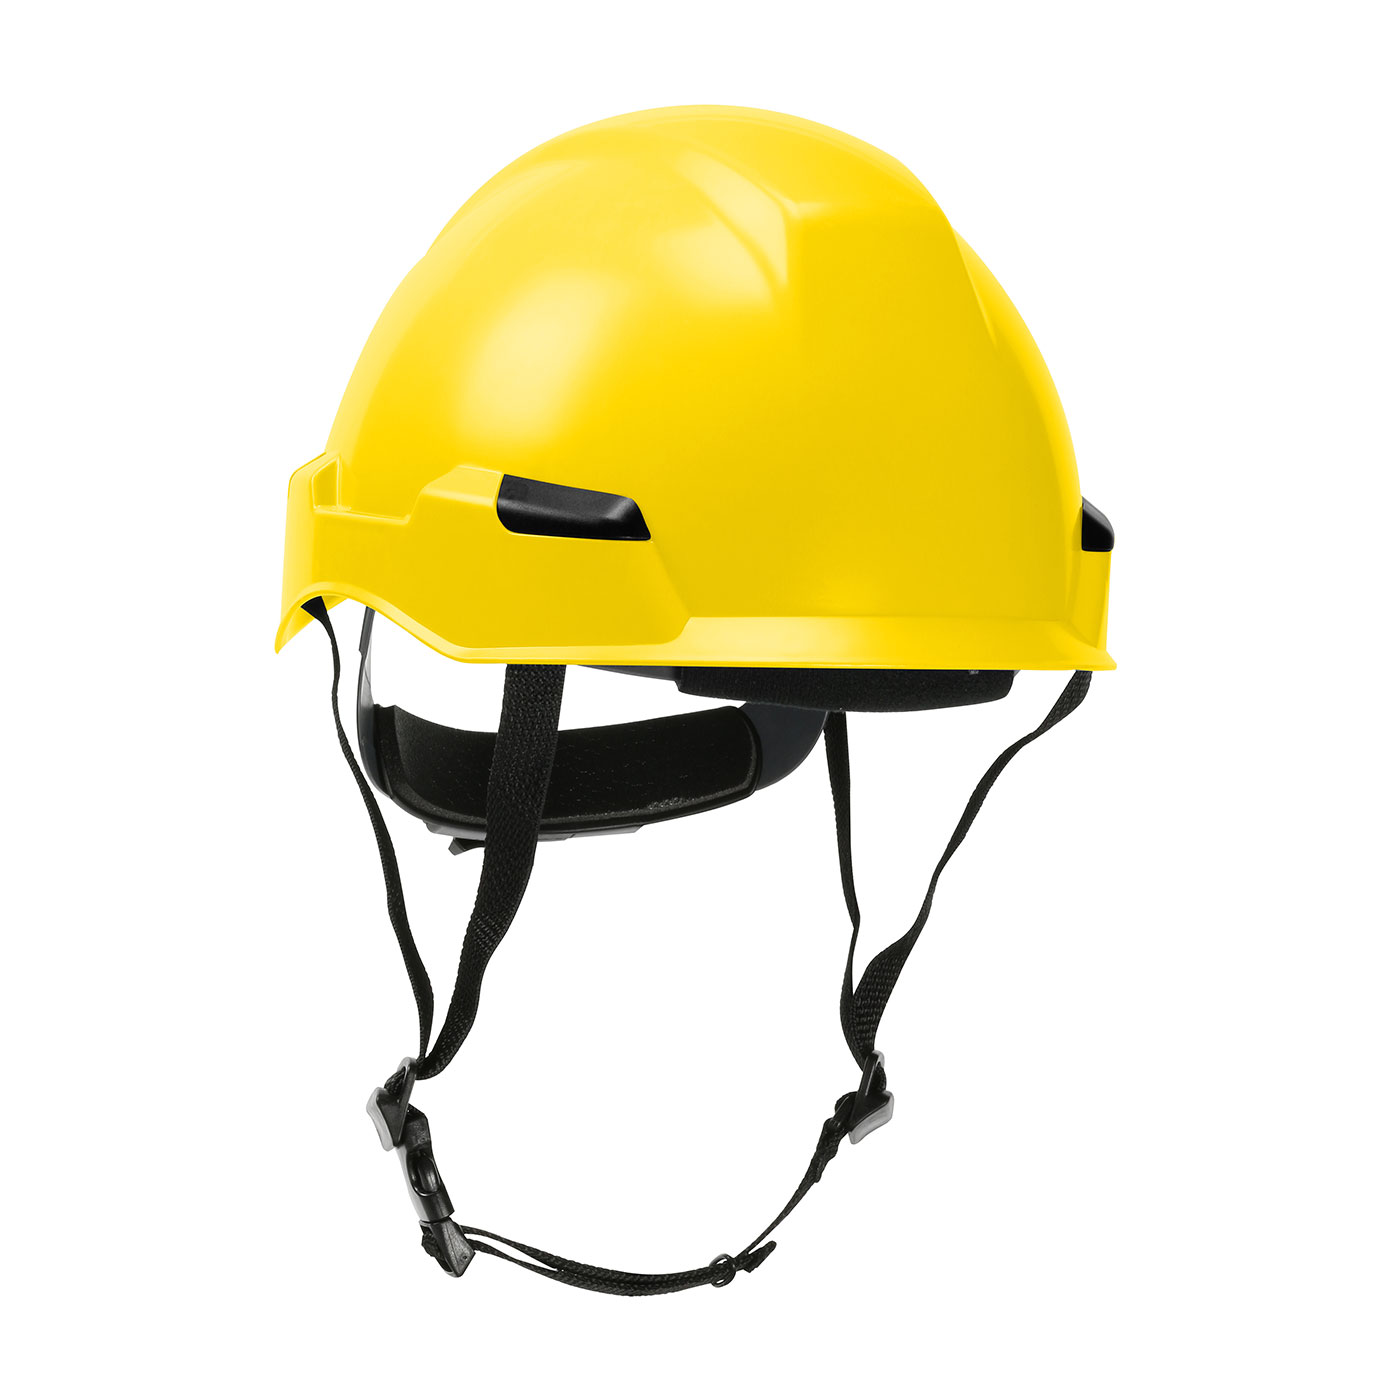 280-HP142R PIP® Dynamic Rocky™ Industrial Climbing Helmet with Polycarbonate / ABS Shell, Hi-Density Foam Impact Liner, Nylon Suspension, Wheel Ratchet Adjustment and 4-Point Chin Strap- Yellow